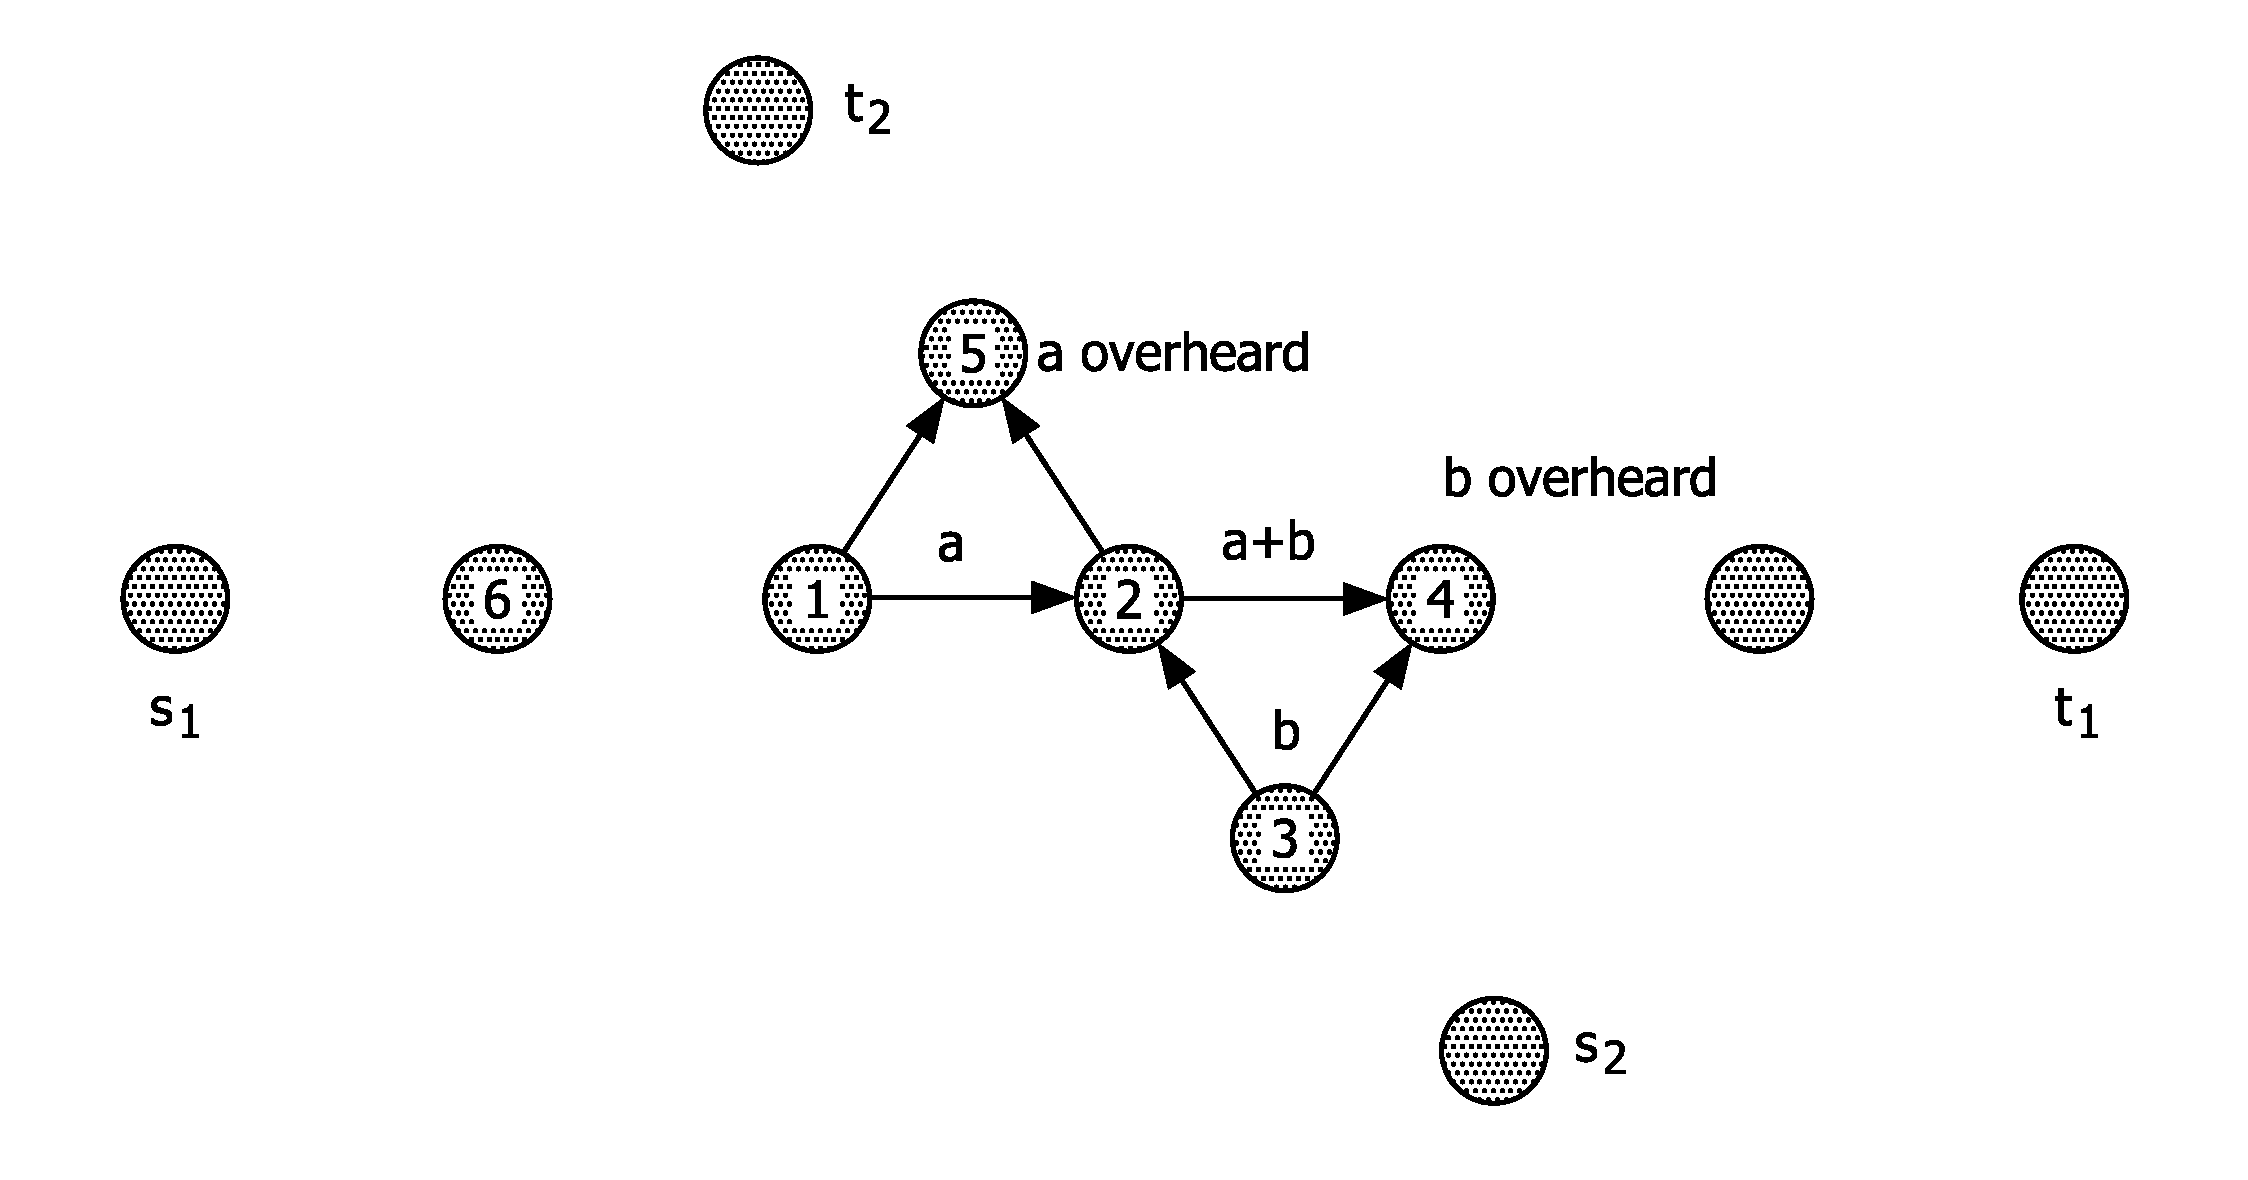 Robust coding in multi-hop networks